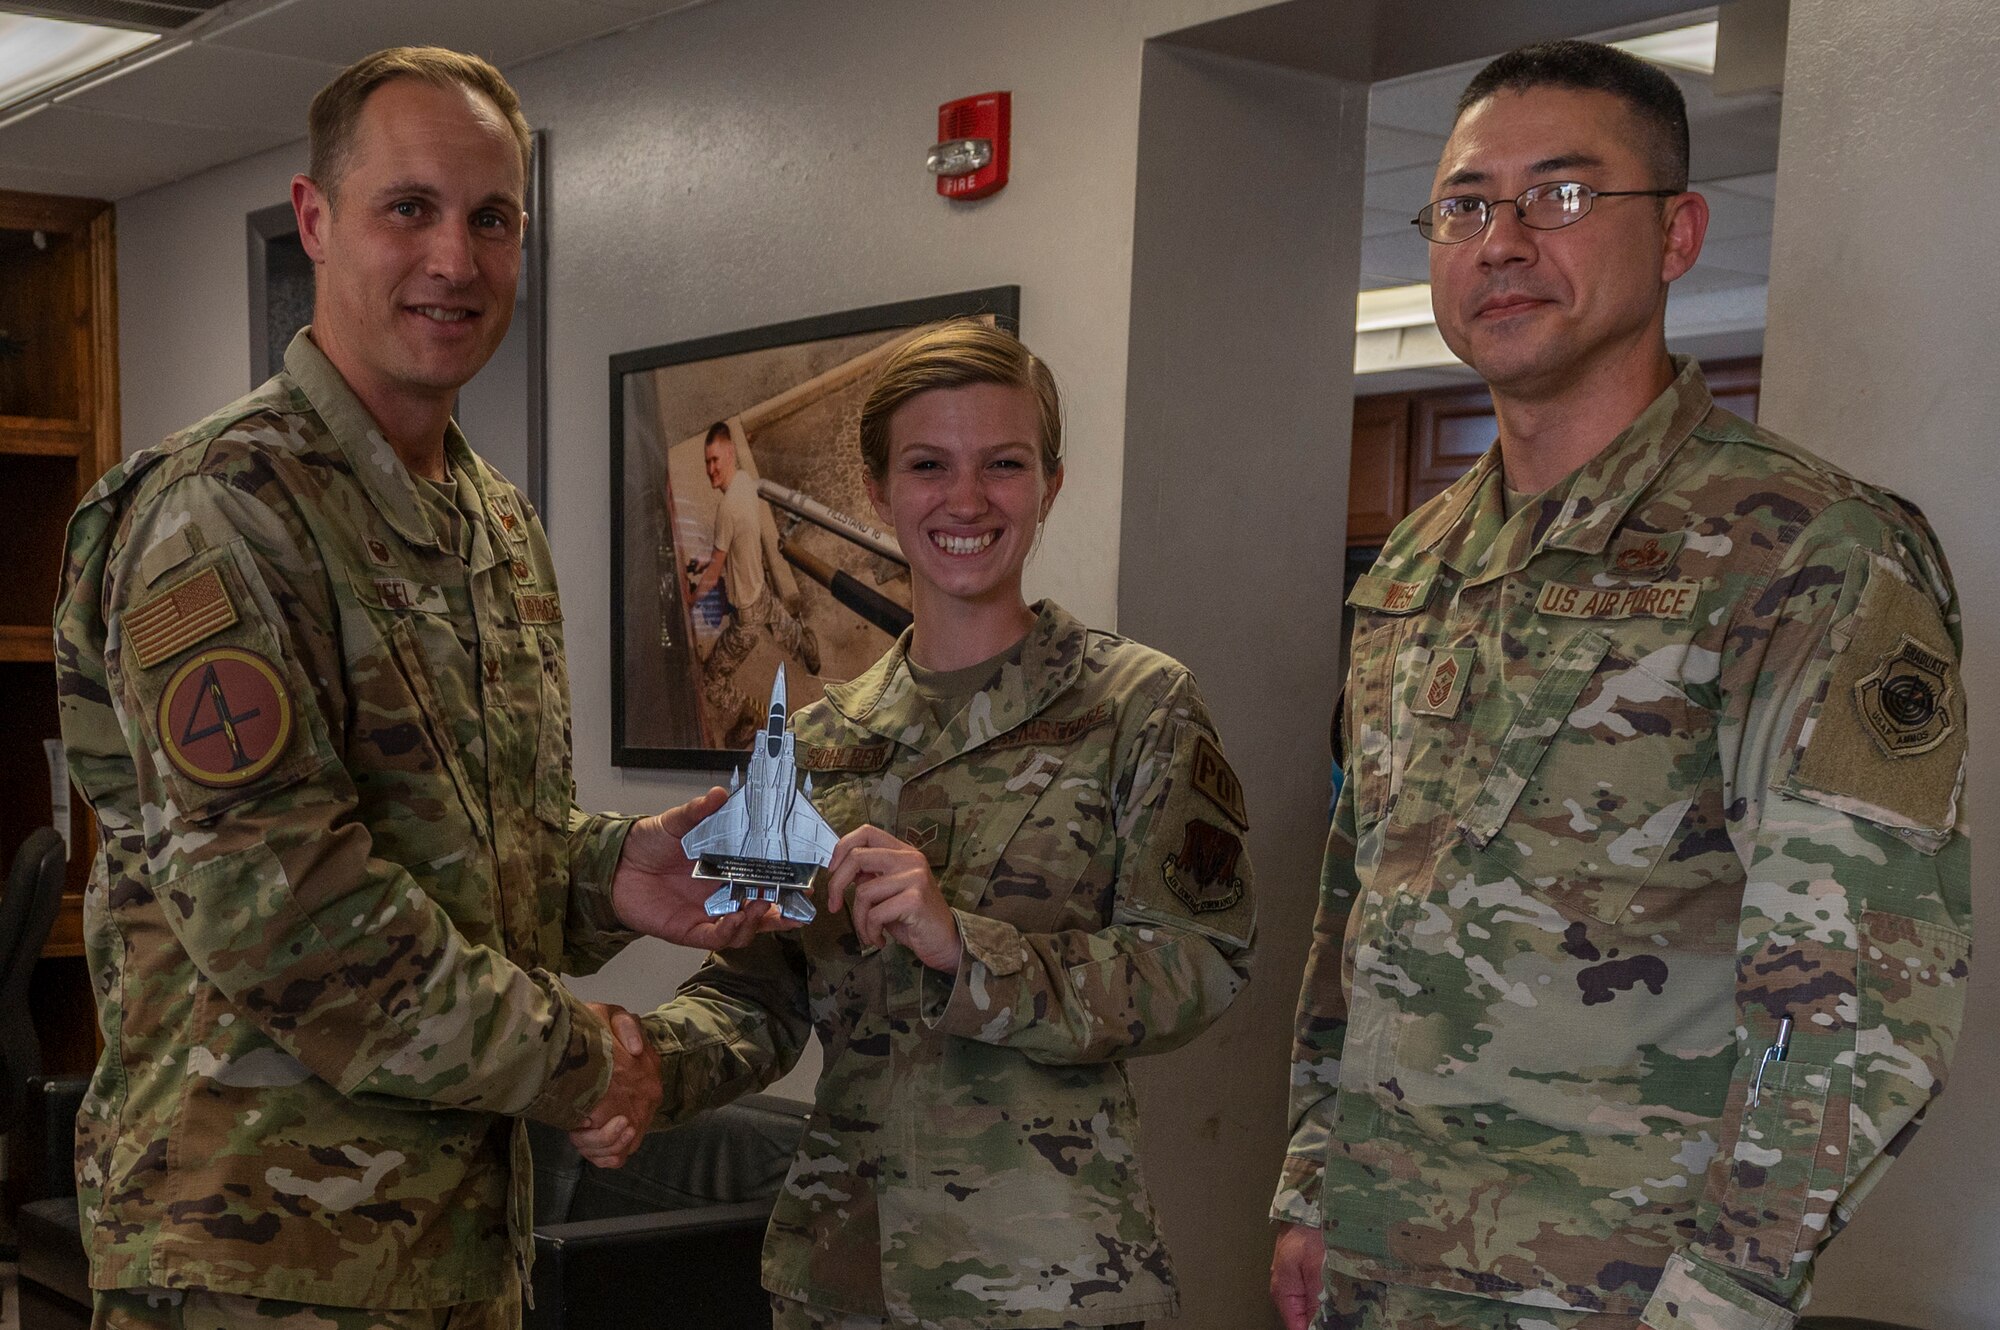 Sohlberg was named the Airman of the 1st quarter for 2022. (U.S. Air Force photo by Senior Airman Kylie Barrow)